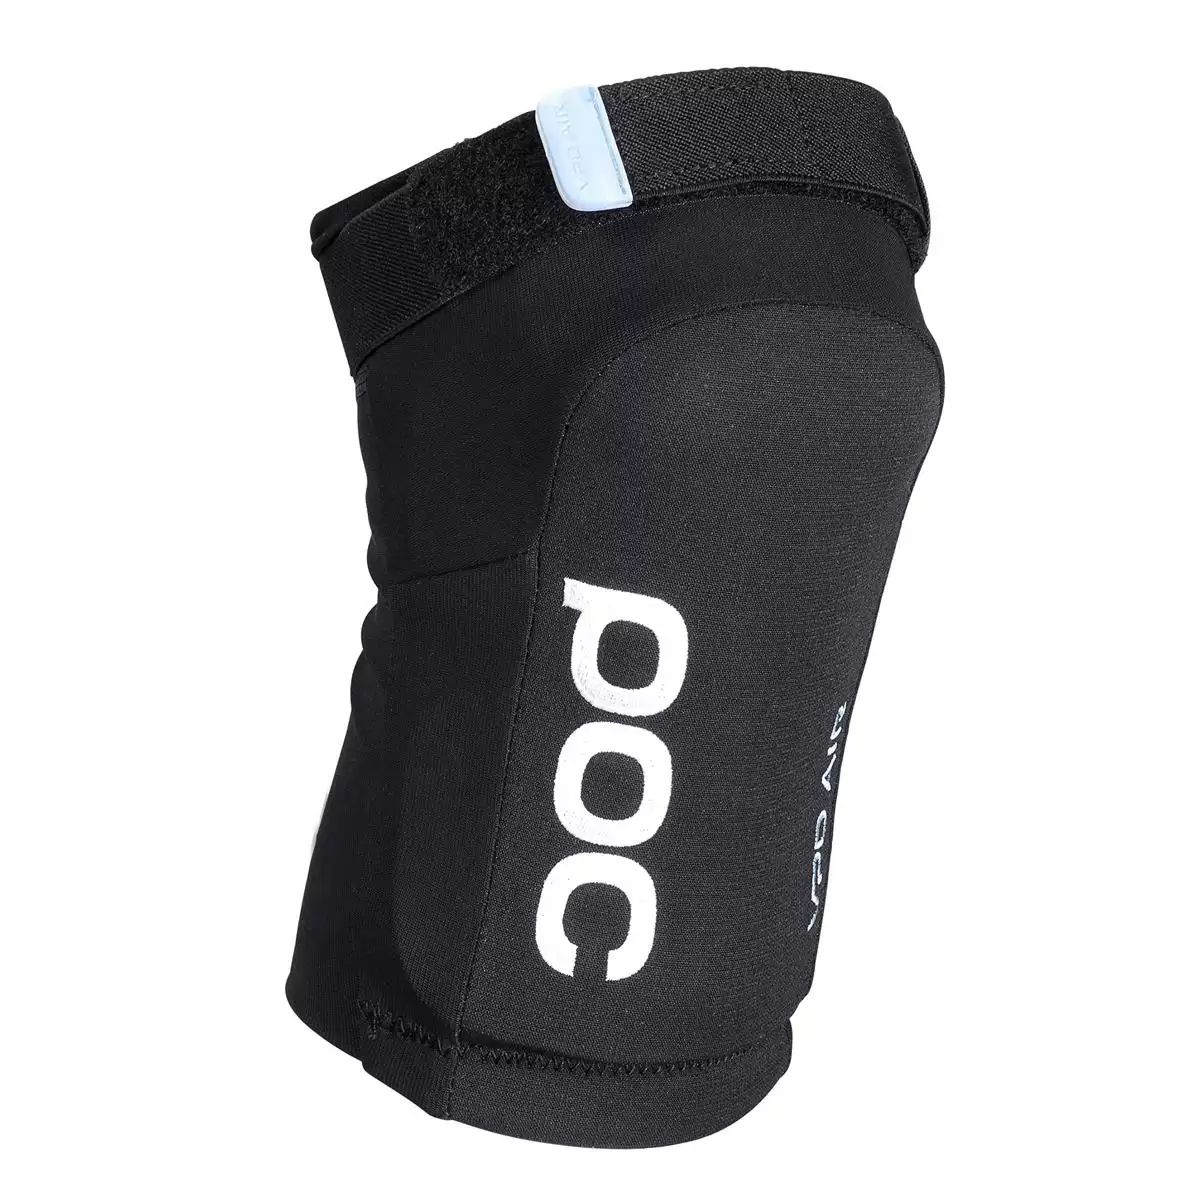 Joint VPD Air Knee pads black Size XL - image